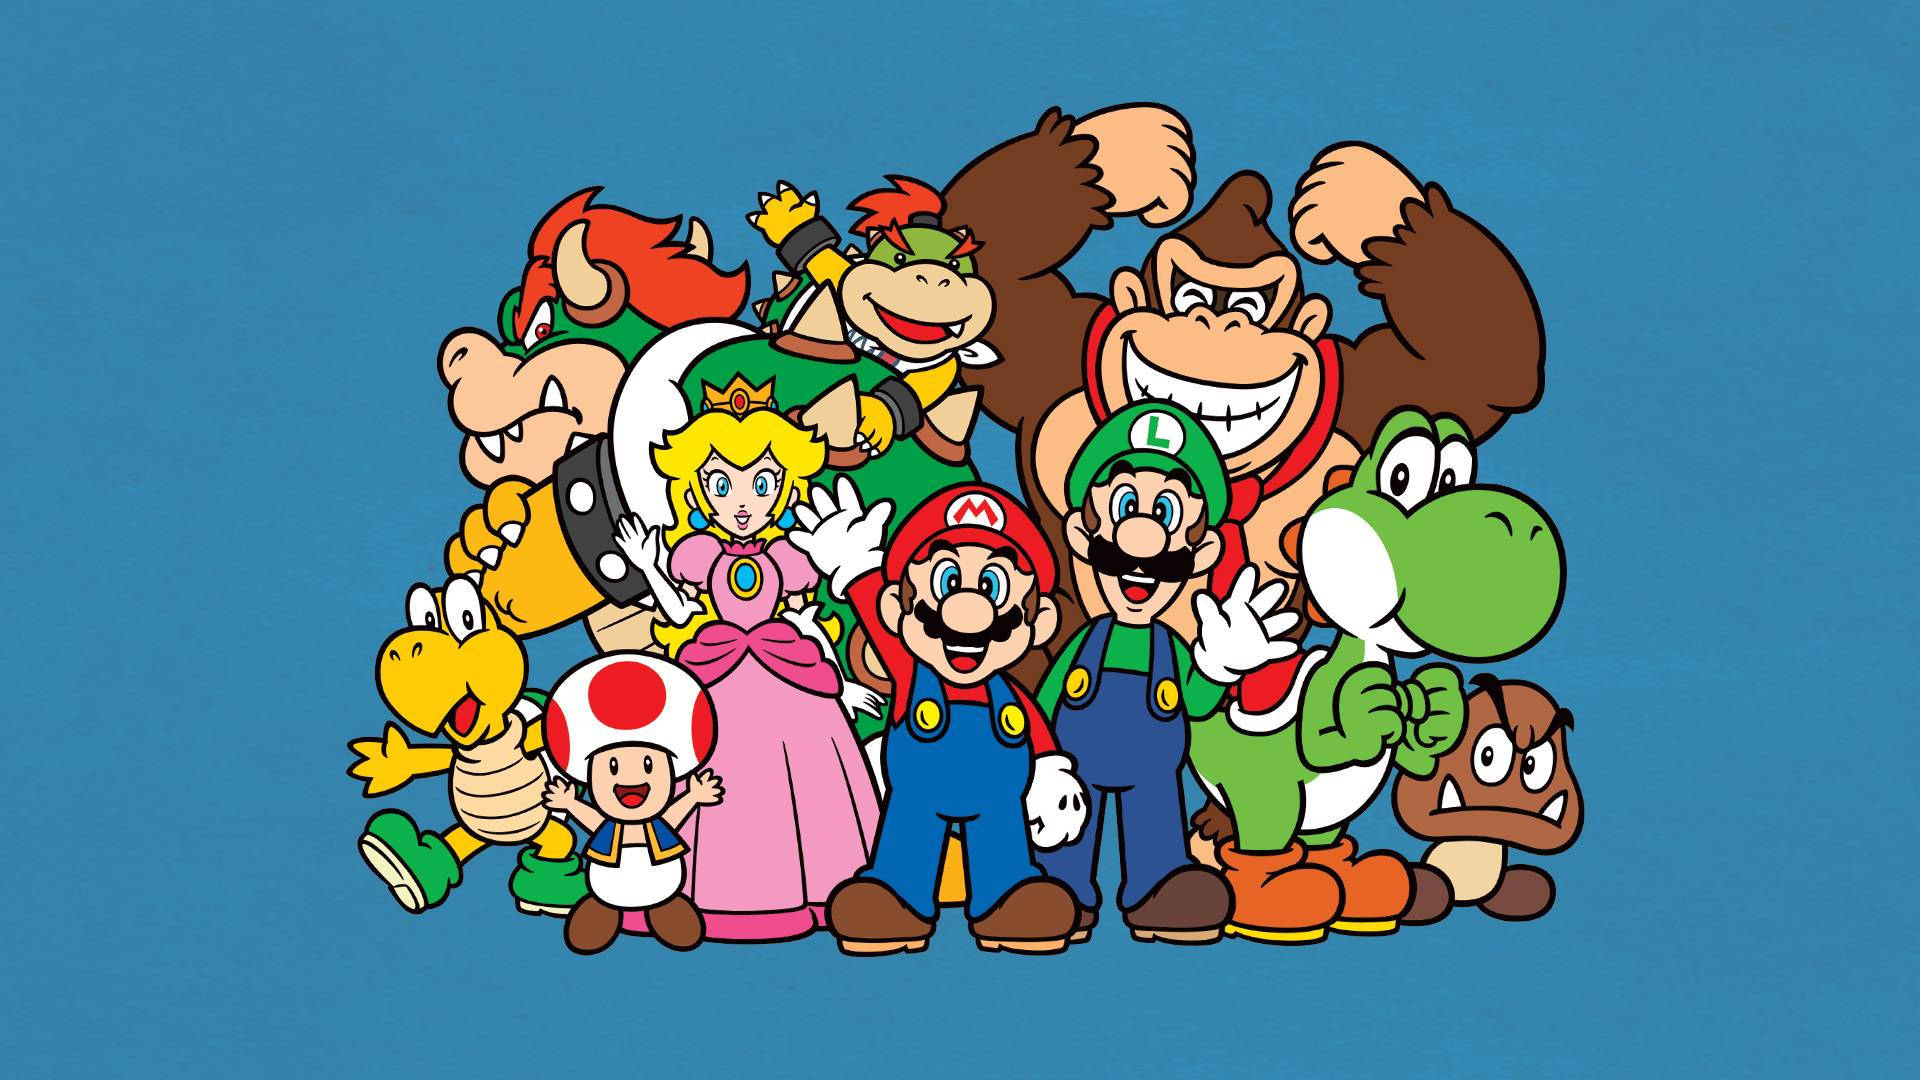 Get your feet ready for the iconic Super Mario! Wallpaper